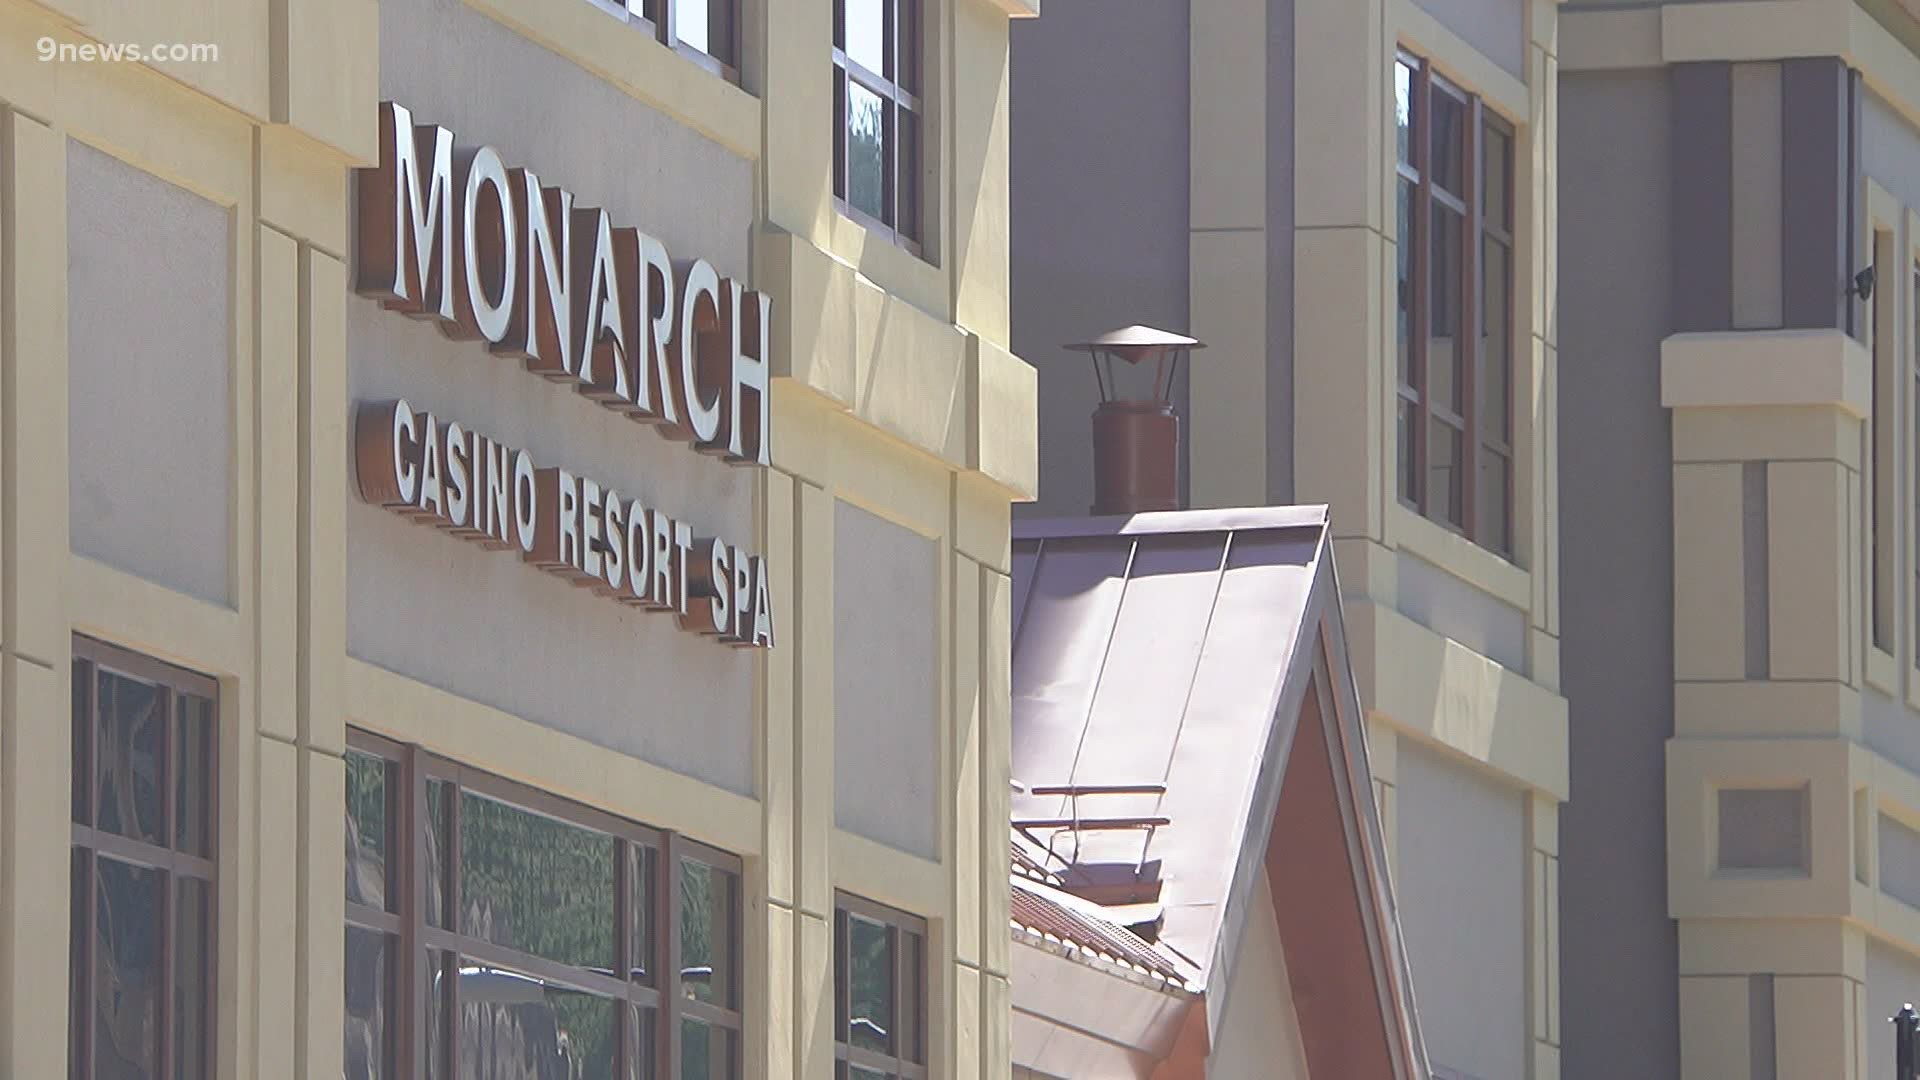 Monarch Casino is looking to hire about 250 workers for their new resort.